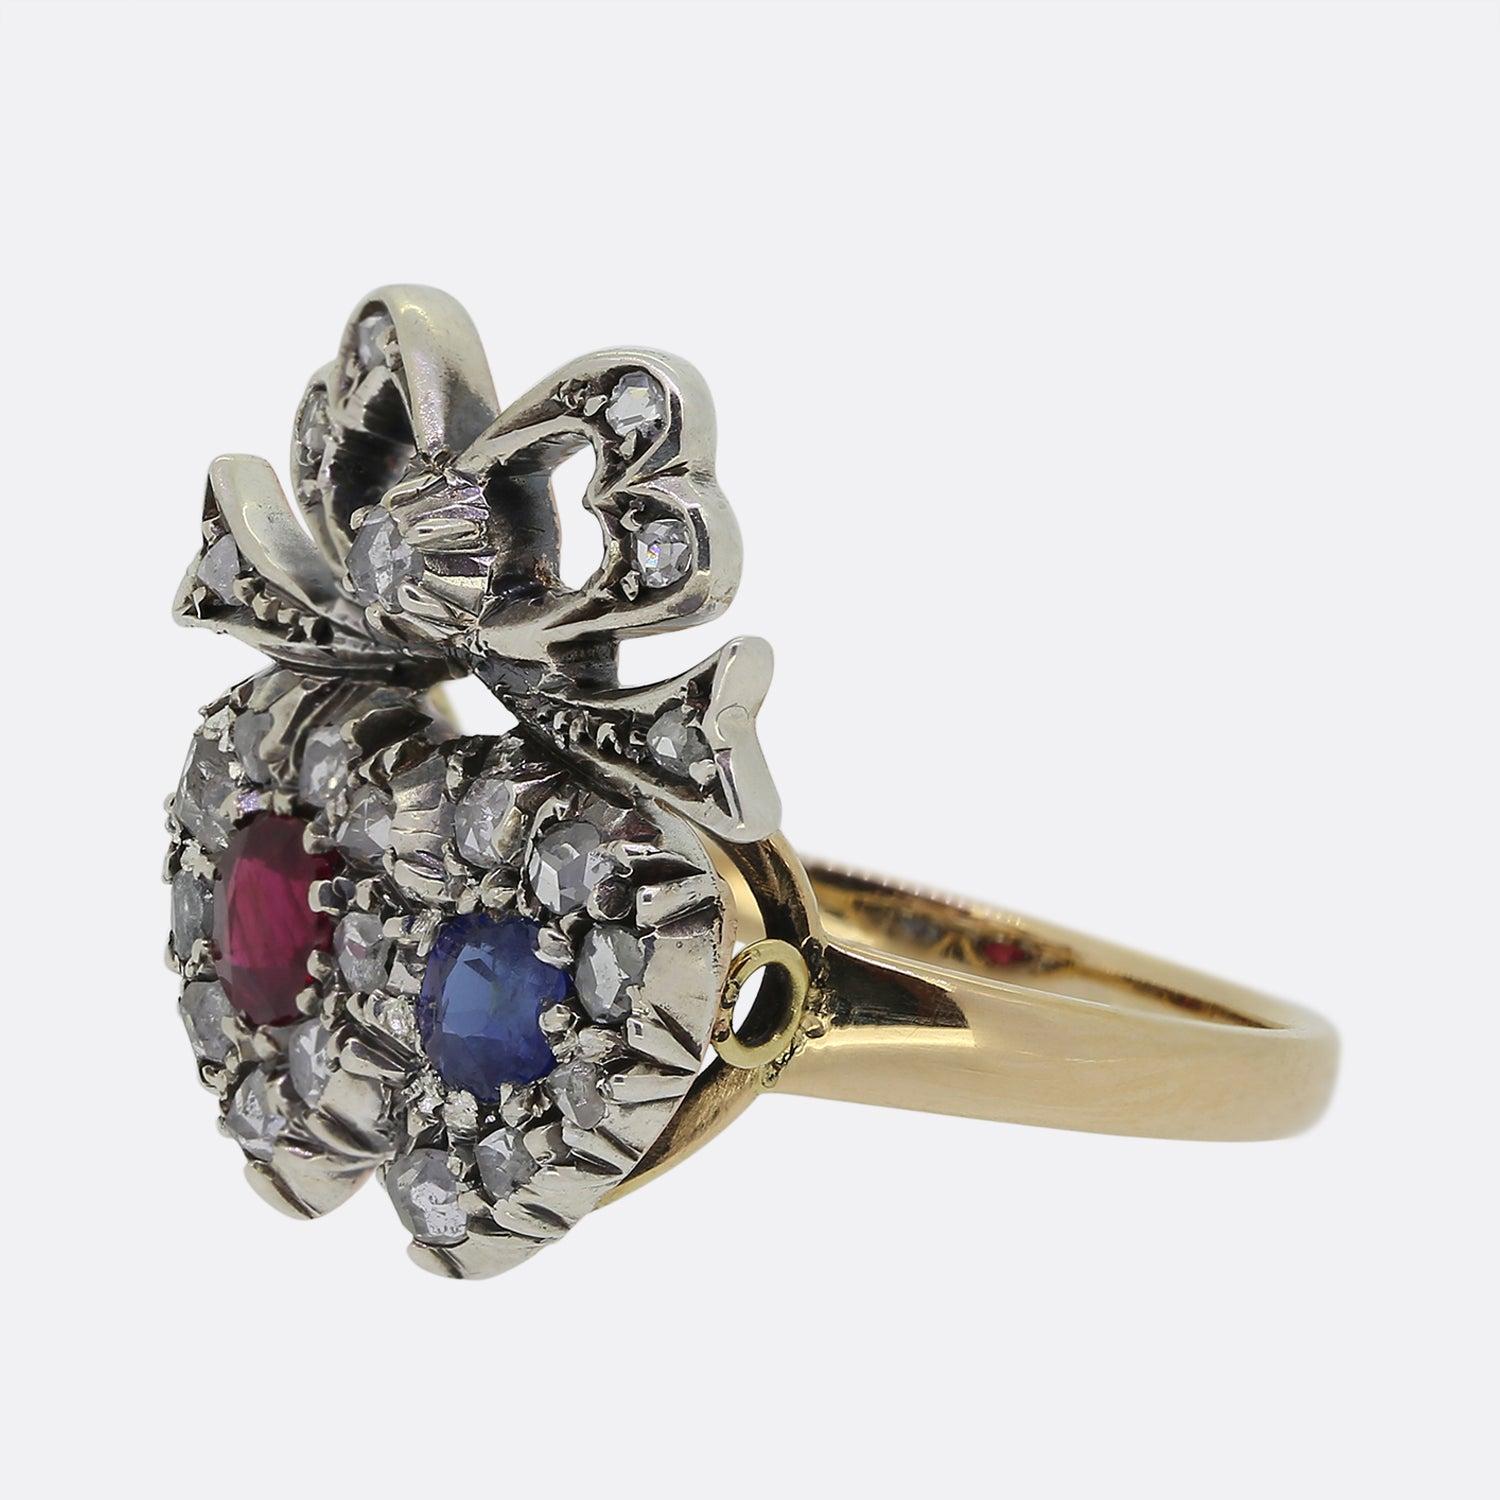 Here we have a fine example of a Victorian double heart ring. In this case, a round ruby and sapphire sit at the centre of an accentuating boarder of rose cut diamonds. A conjoining rose cut diamond encrusted crown motif lies atop in platinum